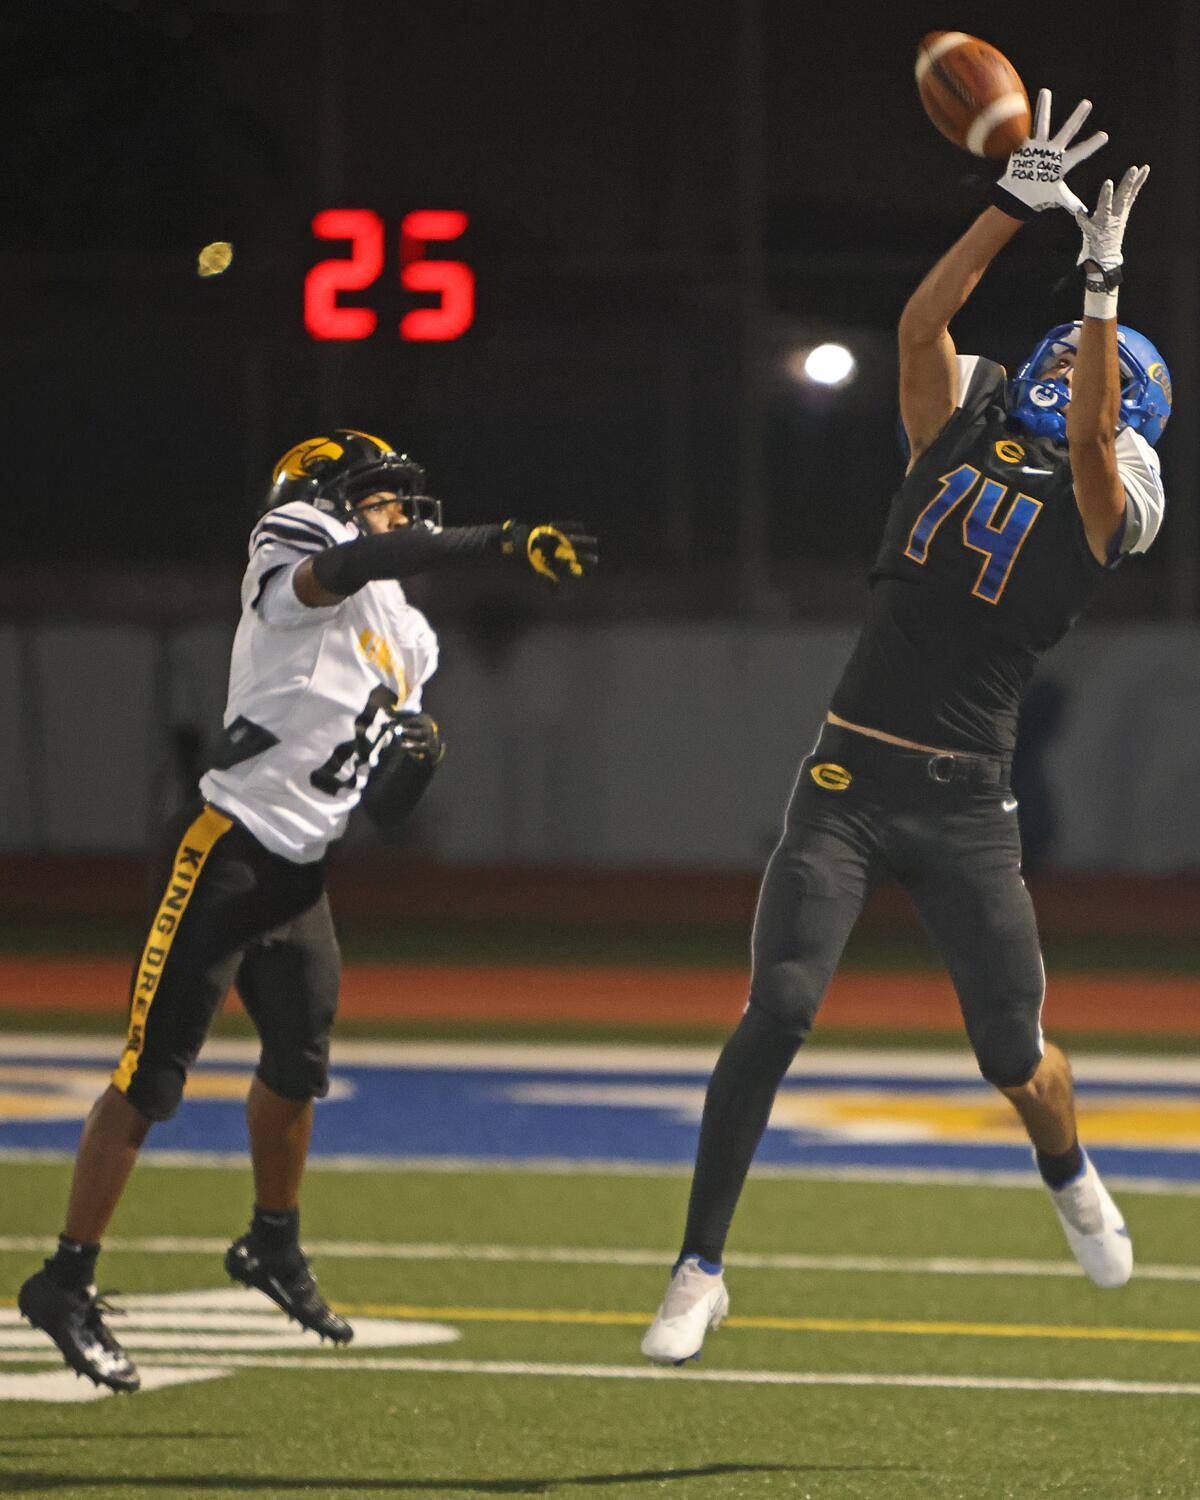 Roberto Salazar of Crenshaw goes up trying to pull down pass during 28-6 win over King/Drew.